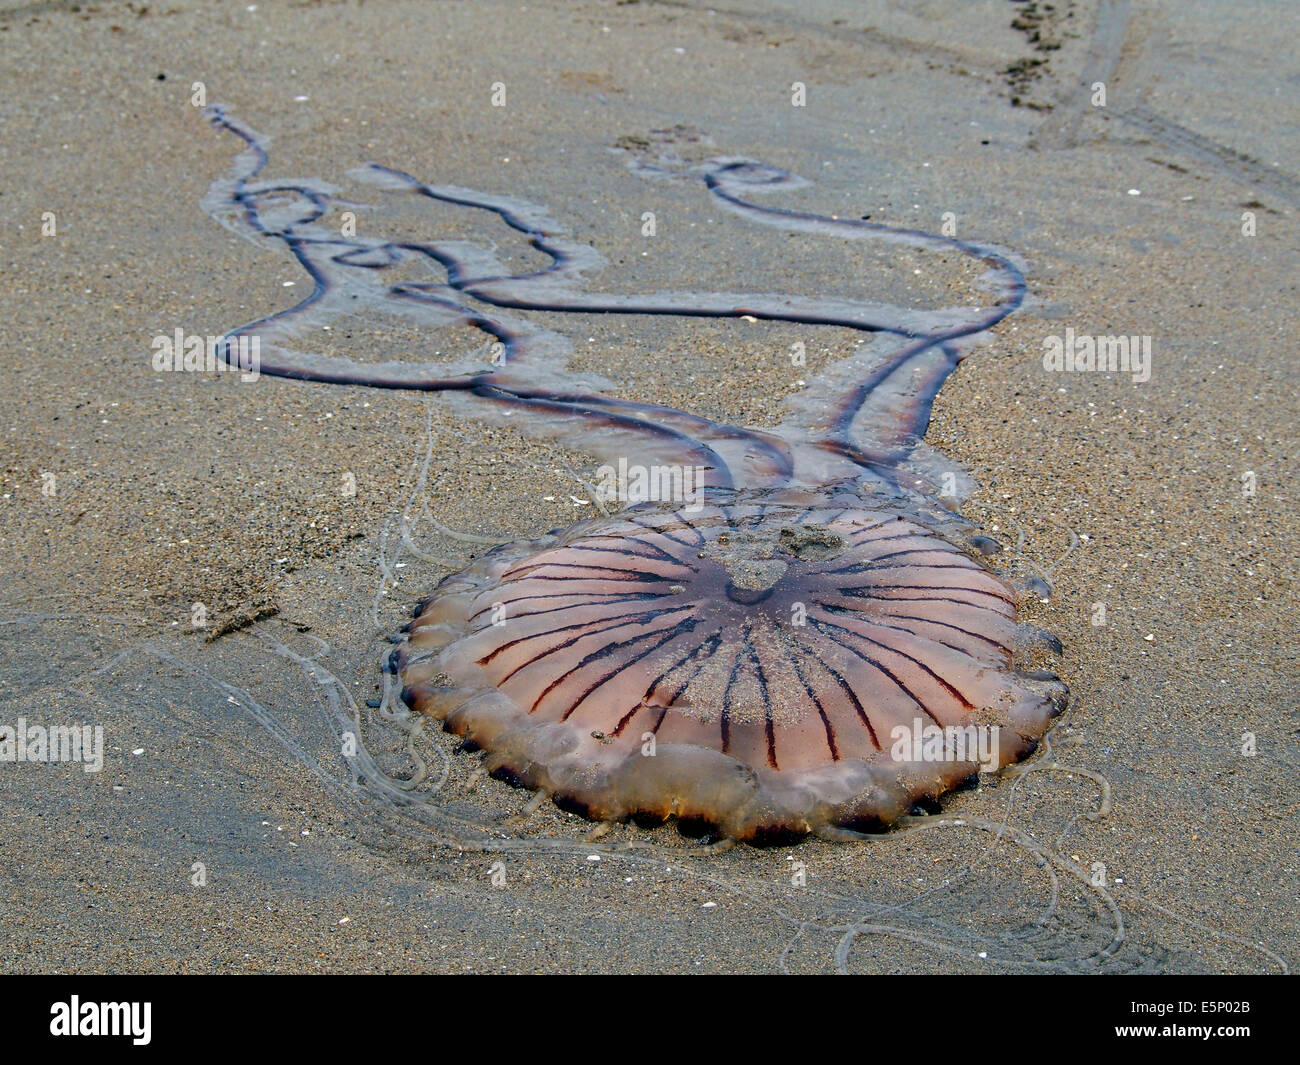 Chrysaora hysoscella, also known as the compass jellyfish washed up on the beach at Mullaghmore, Ireland Stock Photo